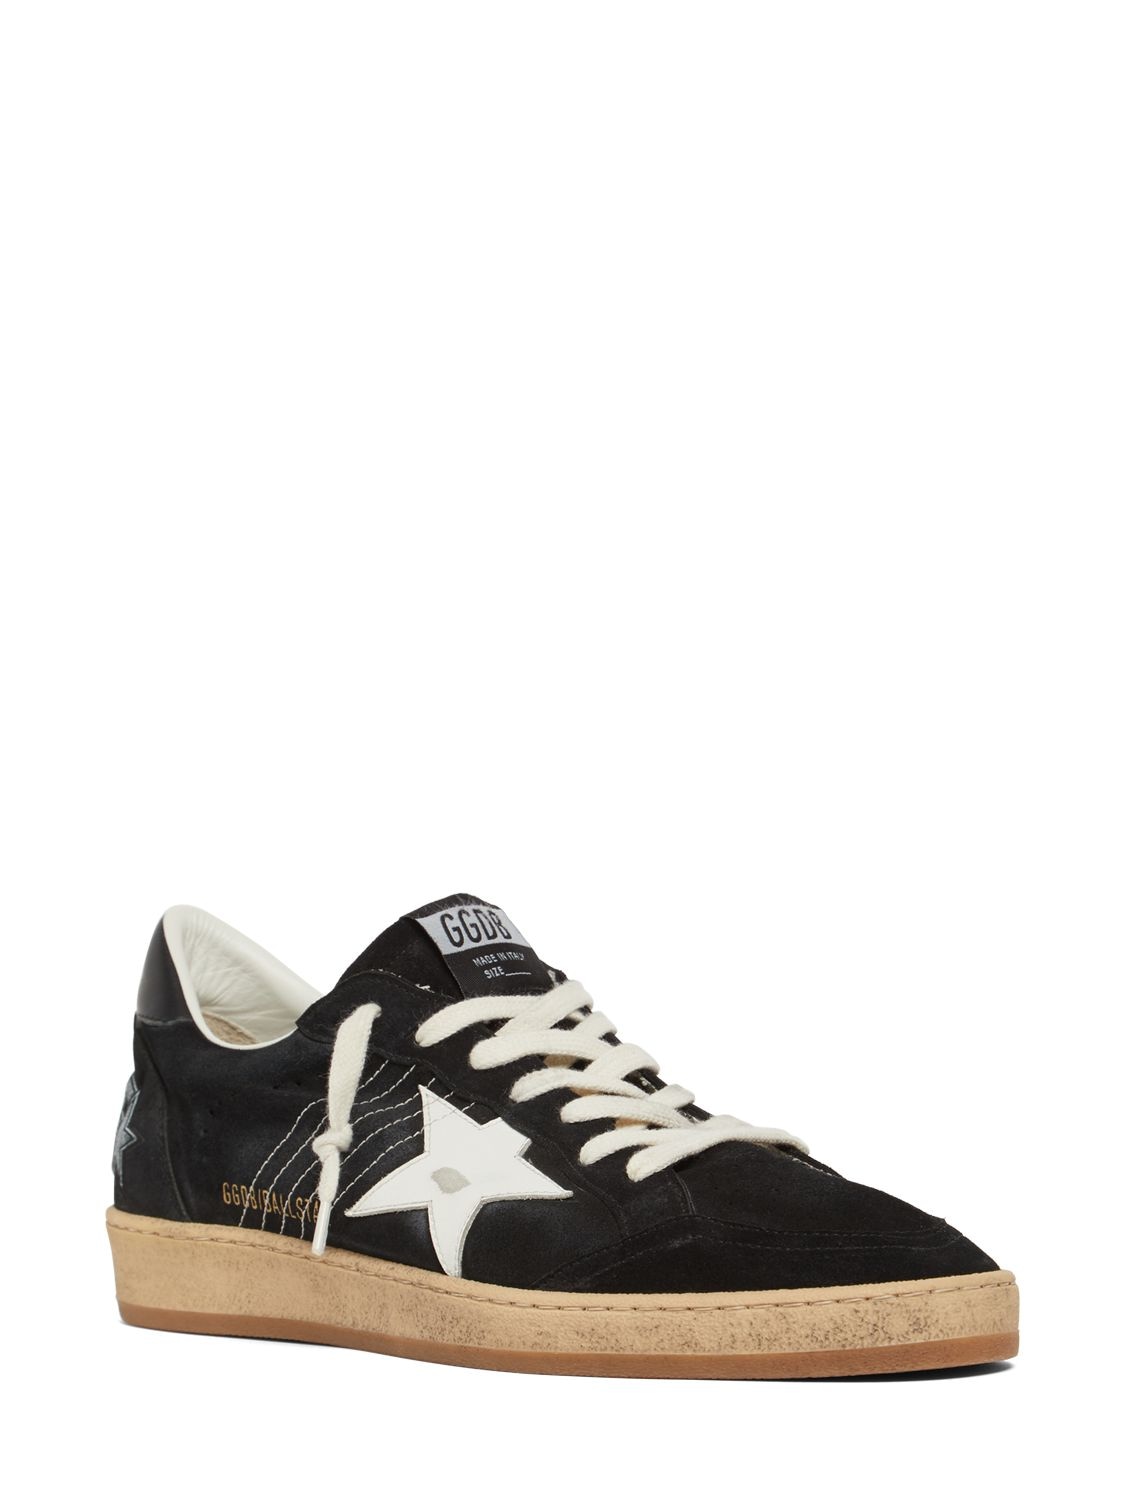 Shop Golden Goose Ball Star Suede Sneakers In Black,white